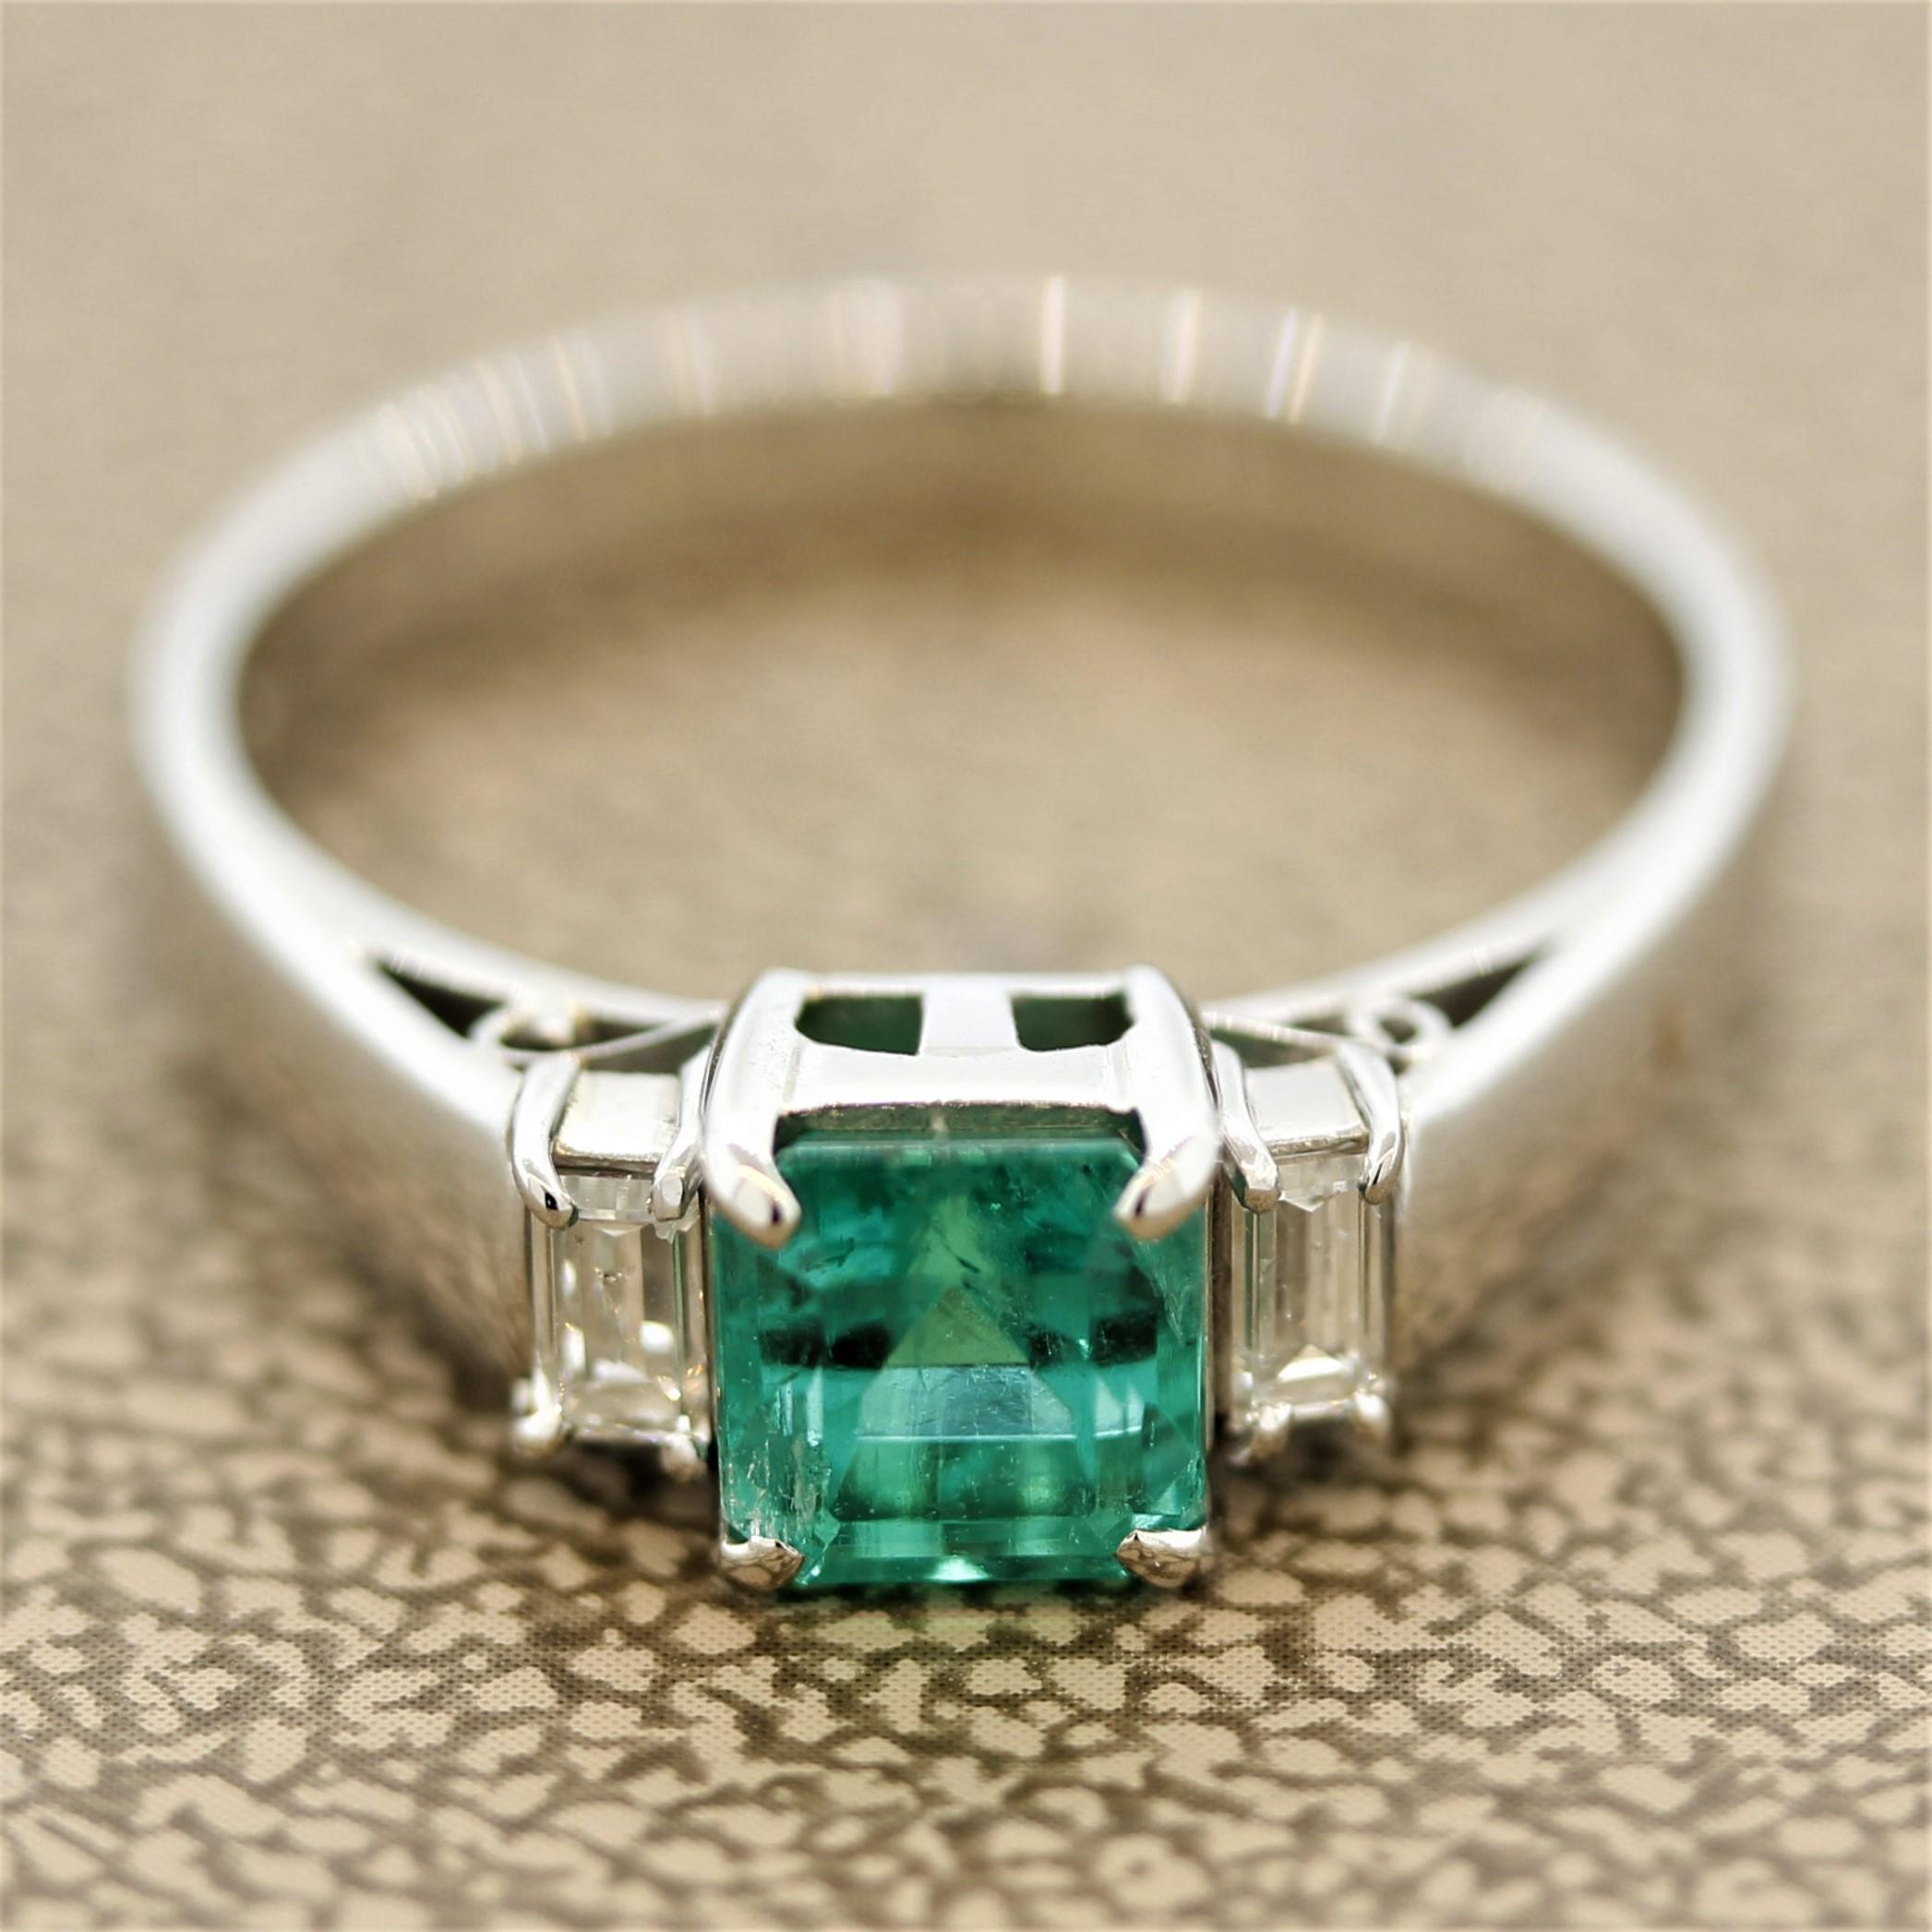 A classic 3-stone ring featuring a gemmy 0.89 carat emerald. It has a bright green color reminiscent of fine Colombian emeralds. Green is the hardest color to accurately photograph, the color of this emerald is even more amazing in person. It is